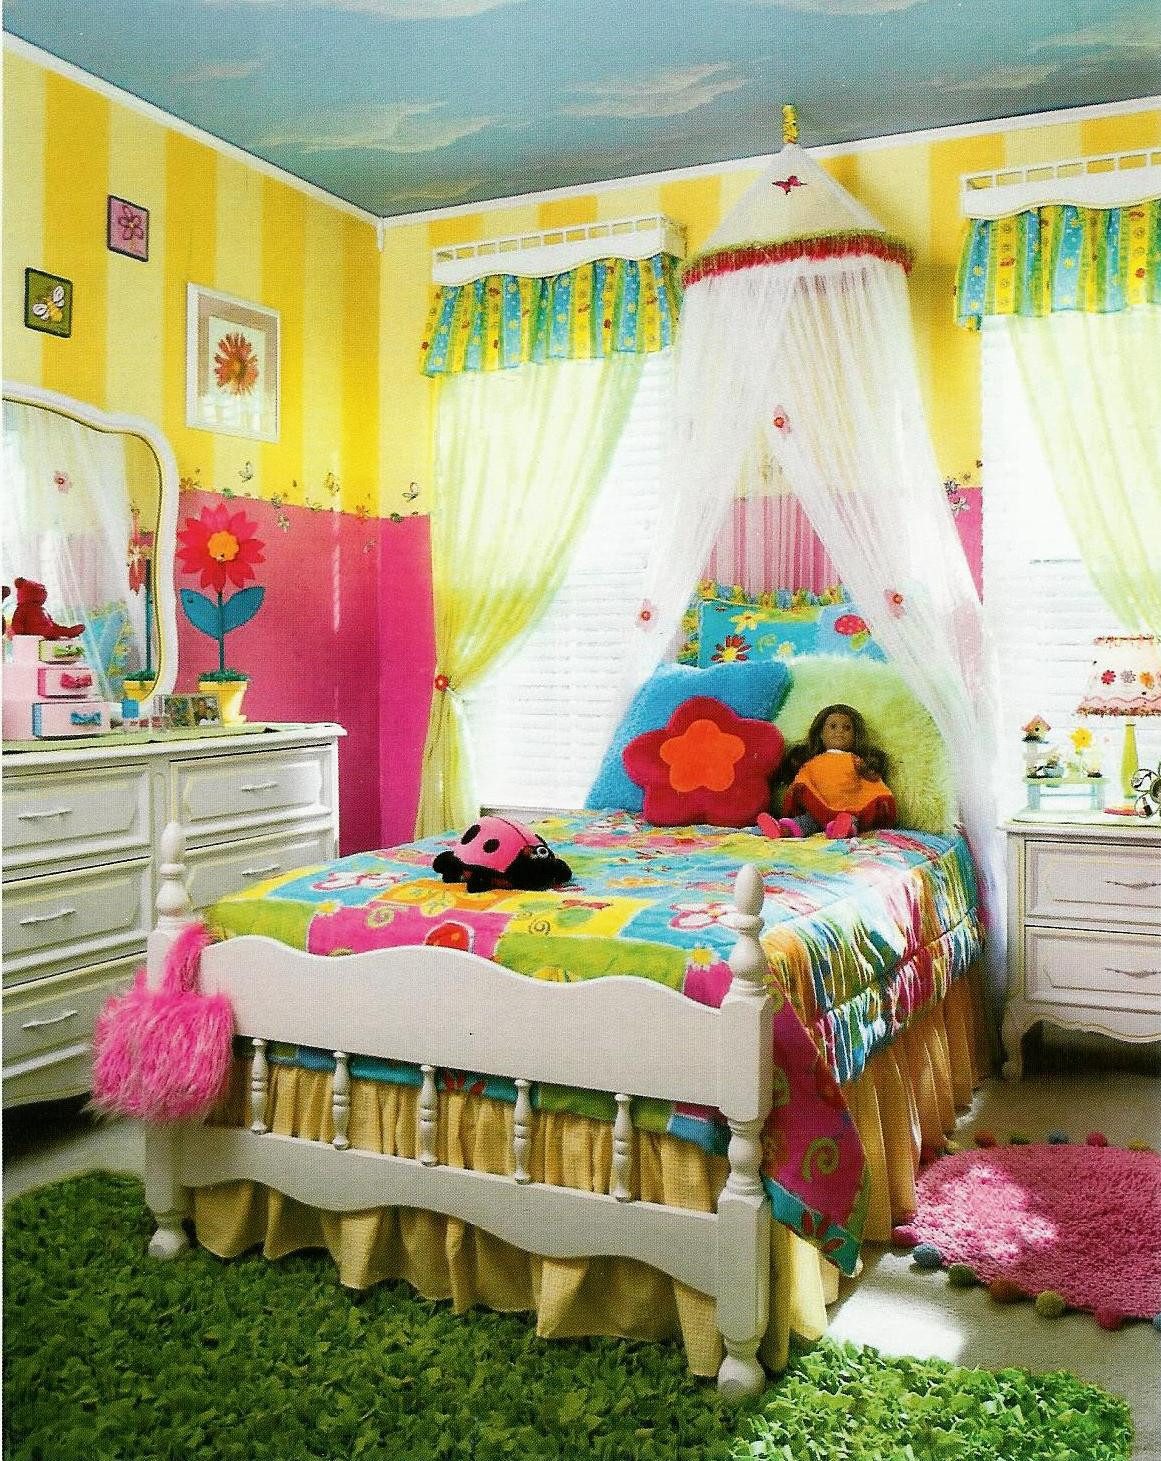 Kids Room Decorations
 Tips for Decorating Kid’s Rooms